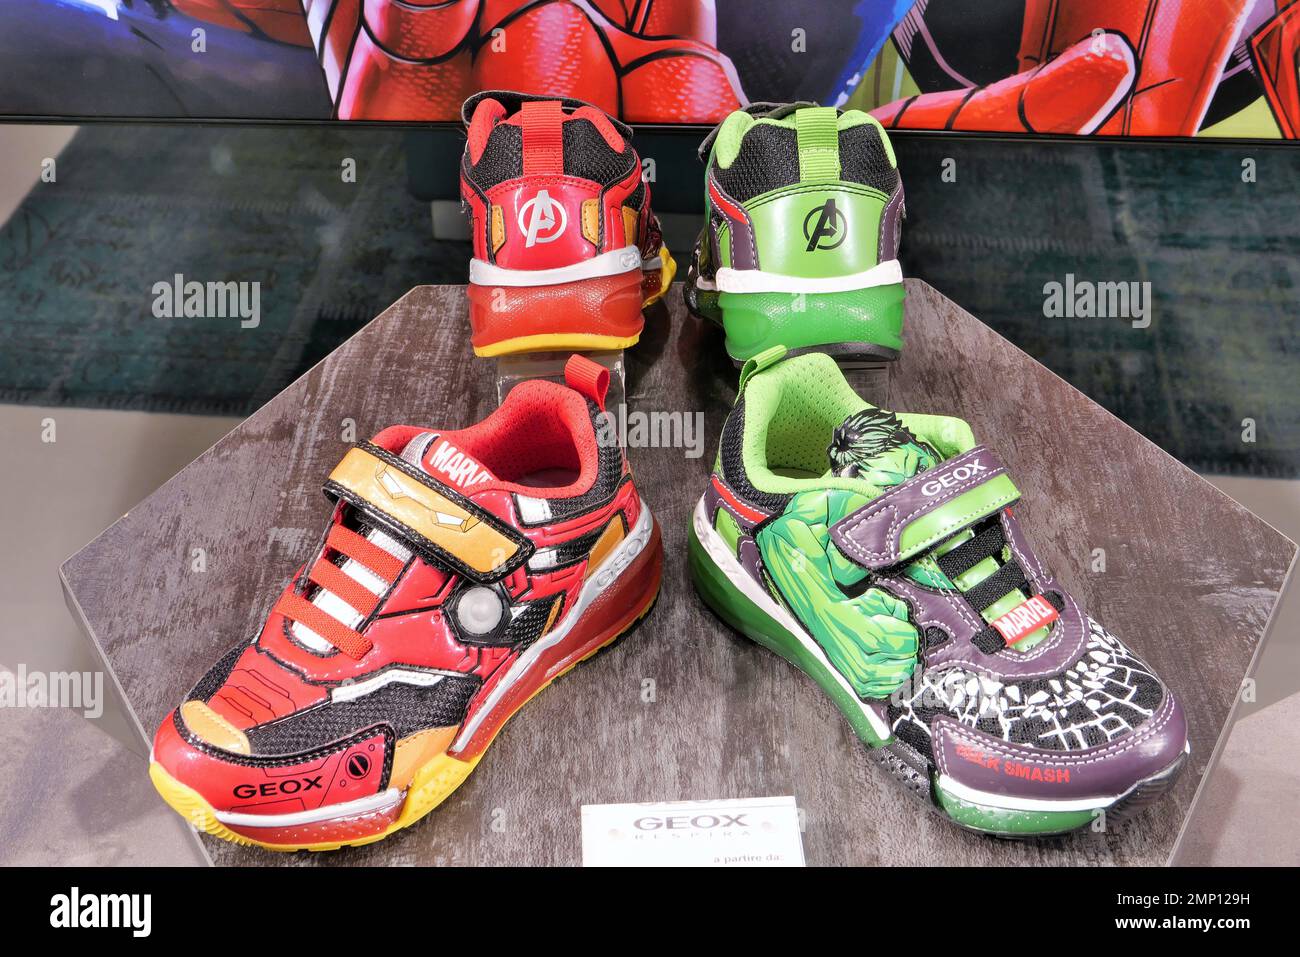 SHOES ON DISPLAY AT GEOX FASHION BOUTIQUE Stock Photo - Alamy